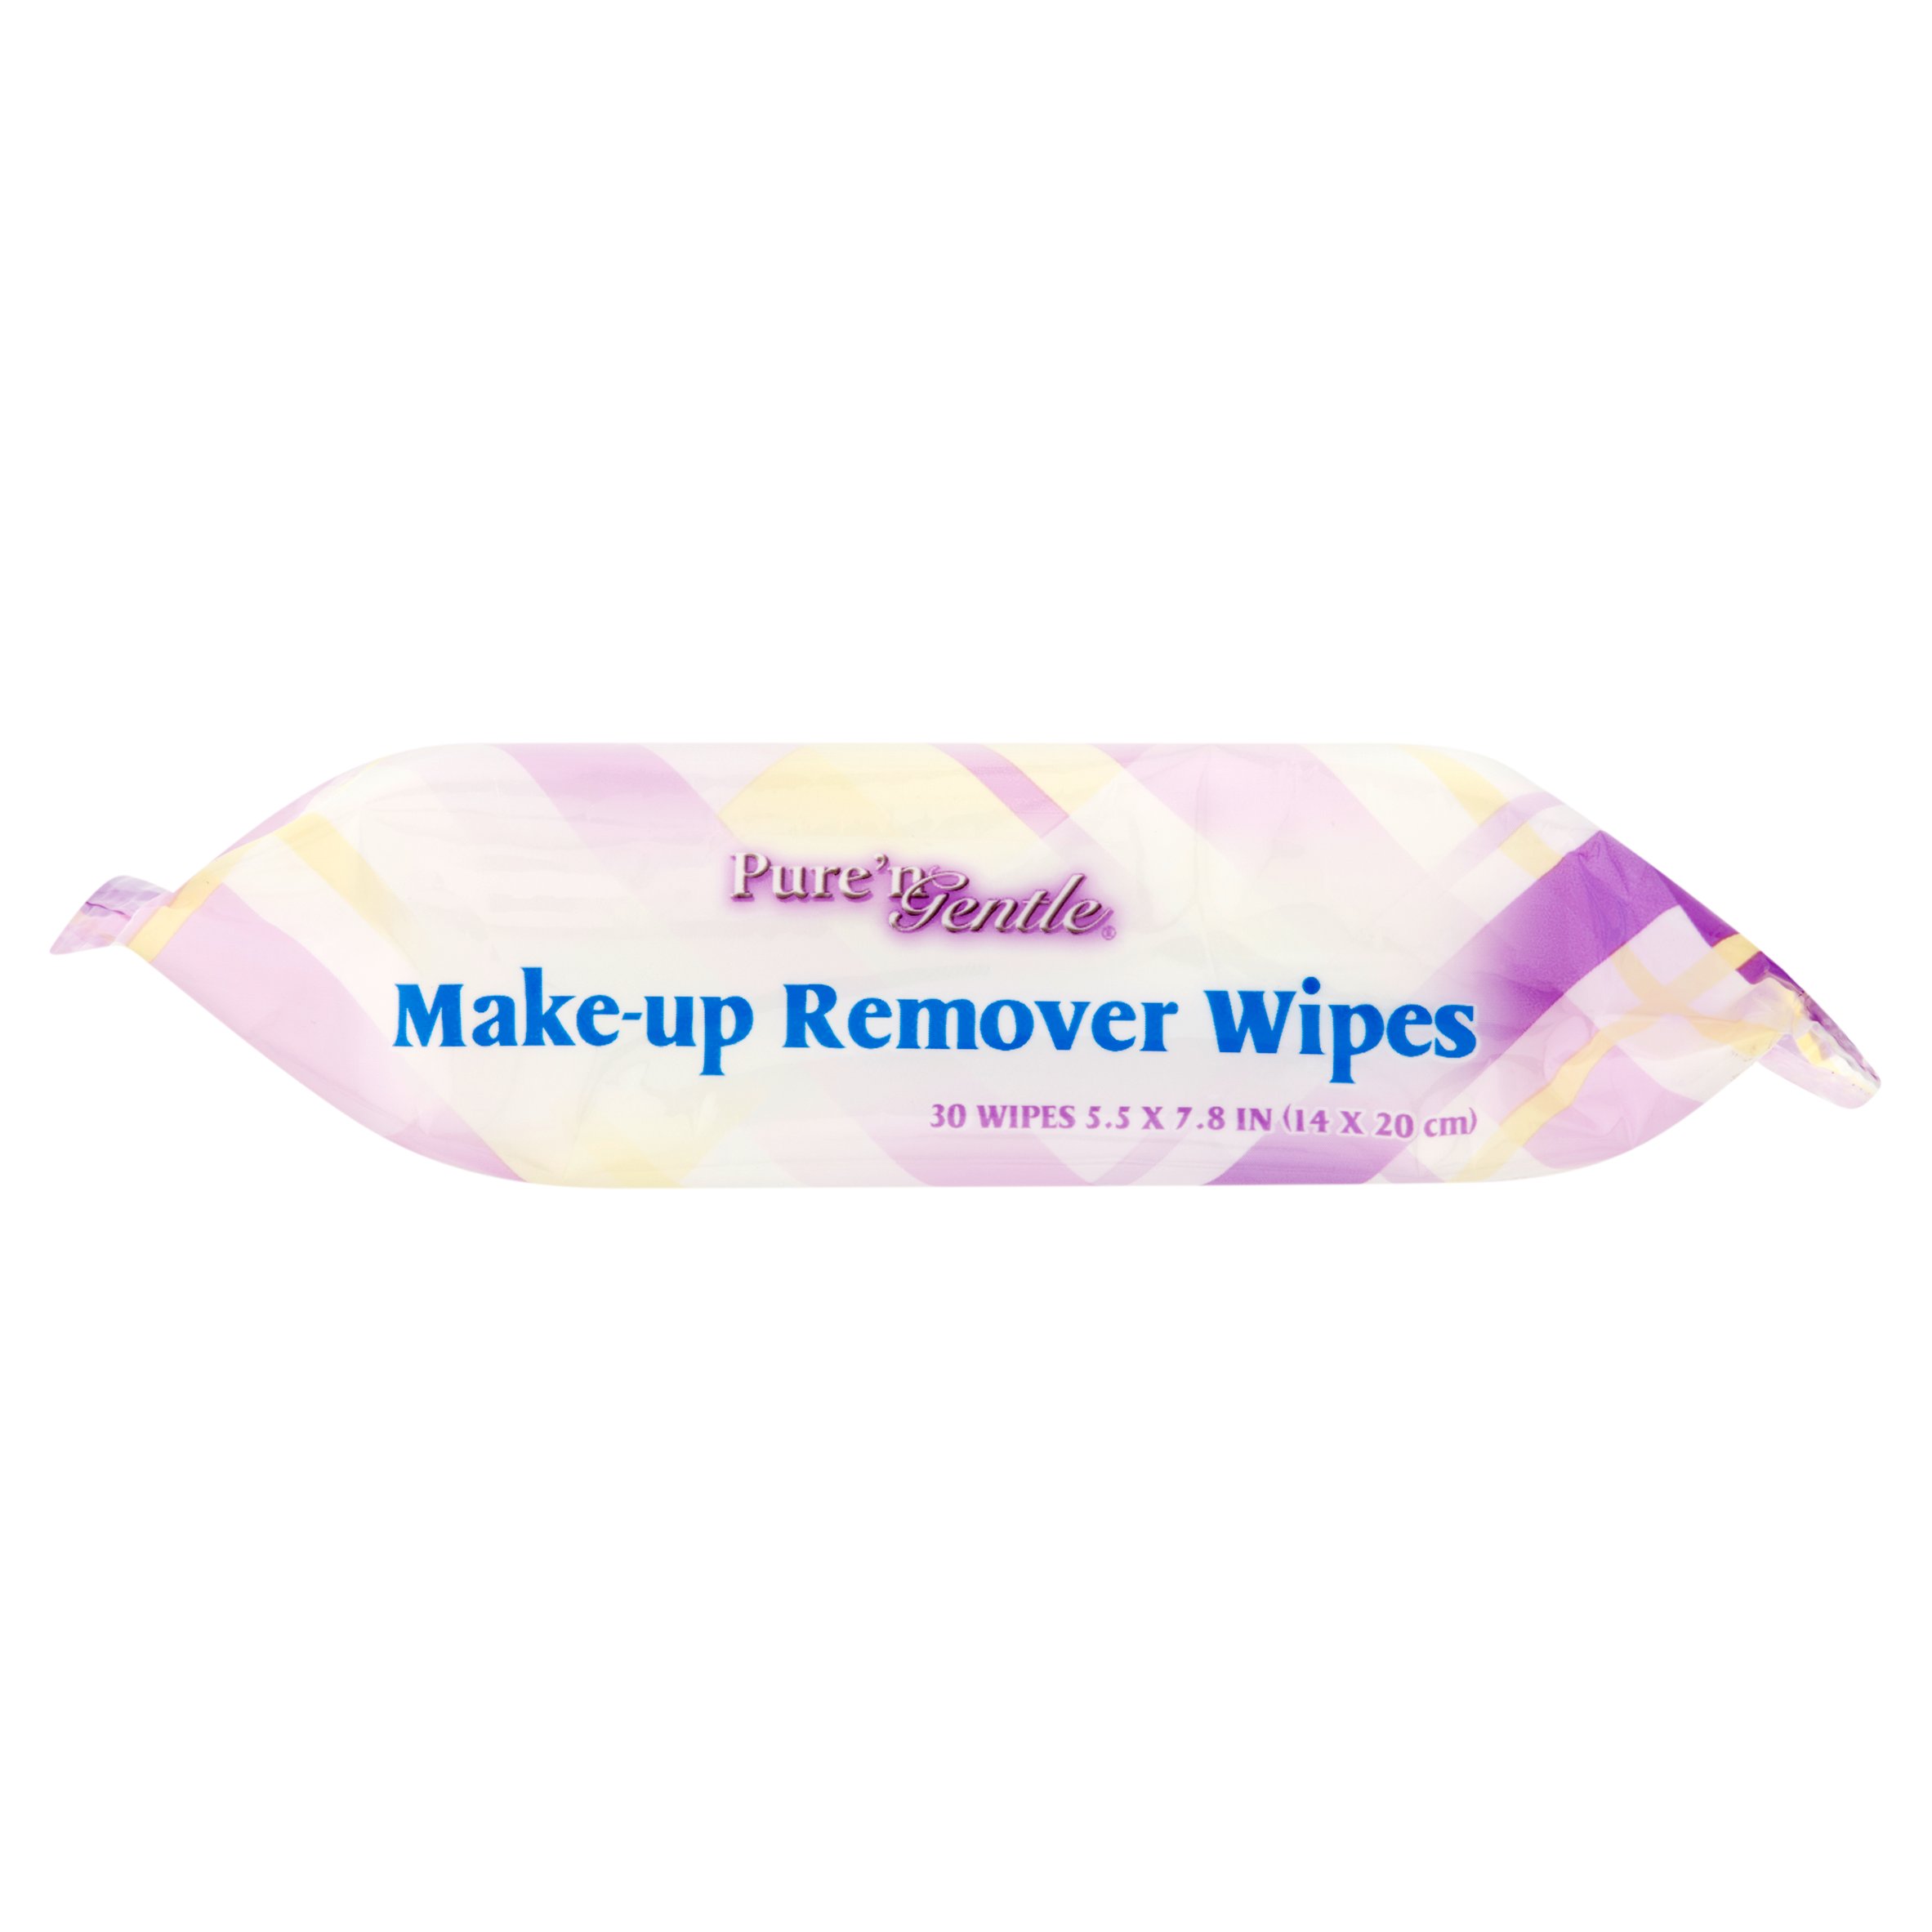 Pure'n Gentle Make-up Remover Wipes, 30 Count - image 3 of 4